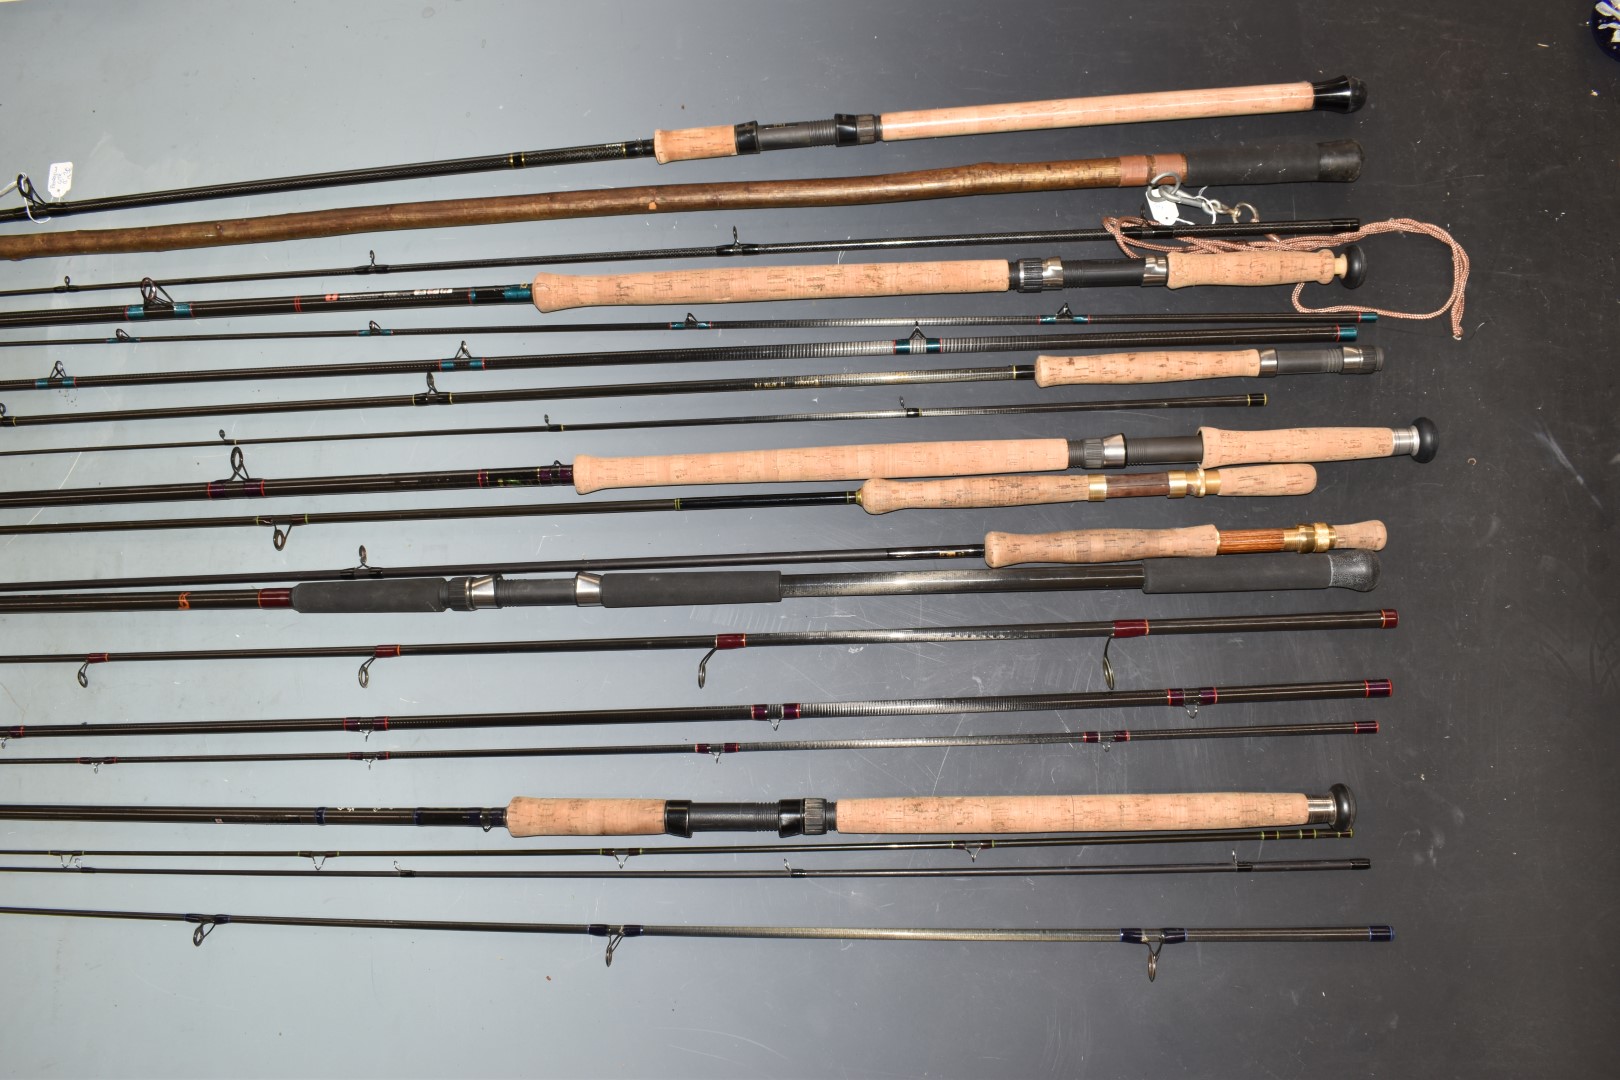 Kis fishing rod hard travel case, L2m, with fishing rods including Peregrine GTX, Ed Schliffke's - Image 2 of 2